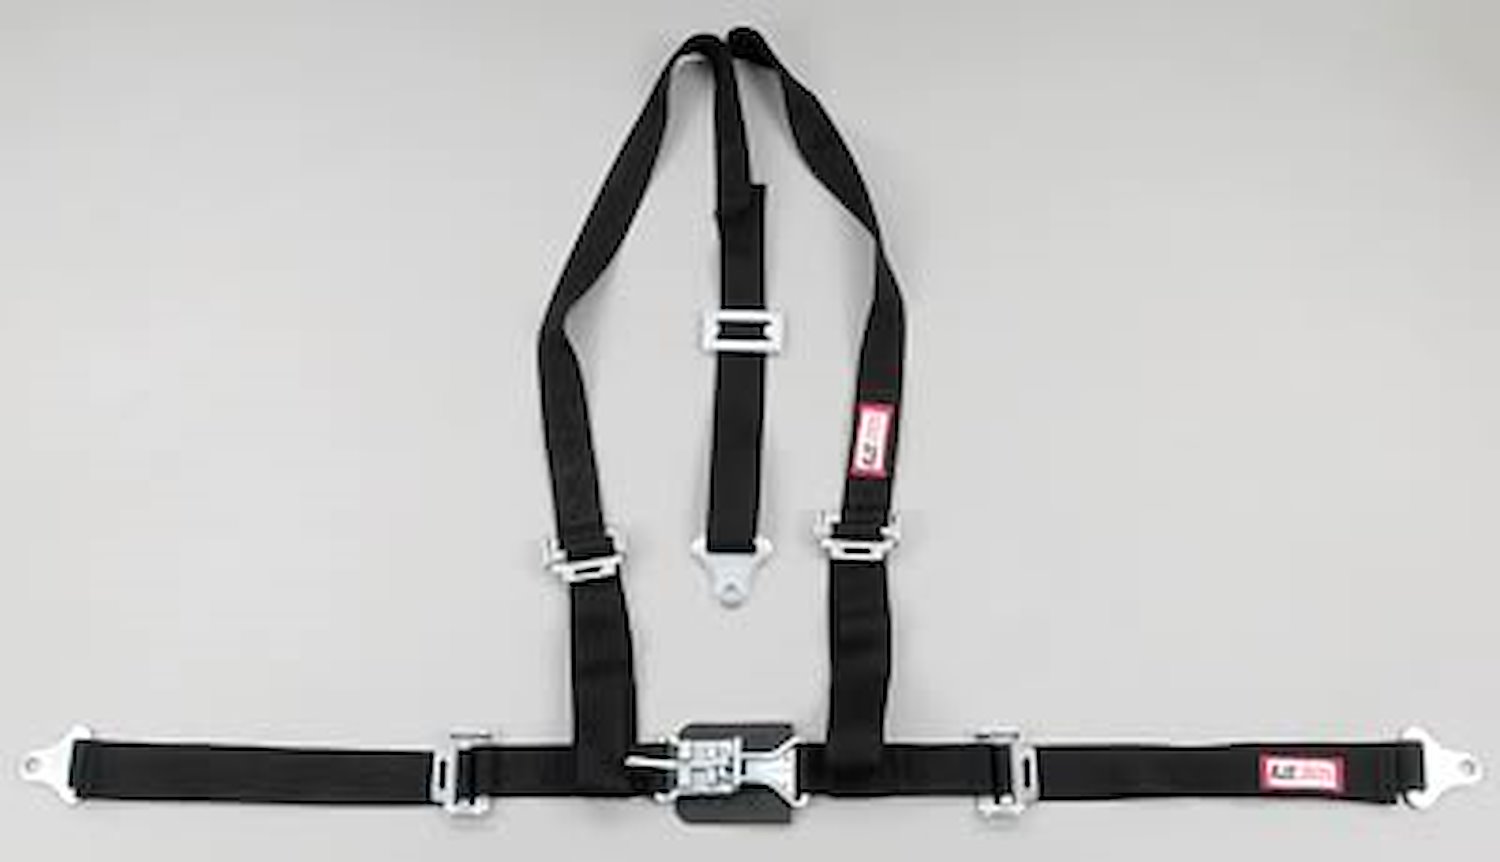 NON-SFI L&L HARNESS 2 PULL UP Lap Belt SNAP SEWN IN 2 S.H. V ROLL BAR Mount BOLT BLUE